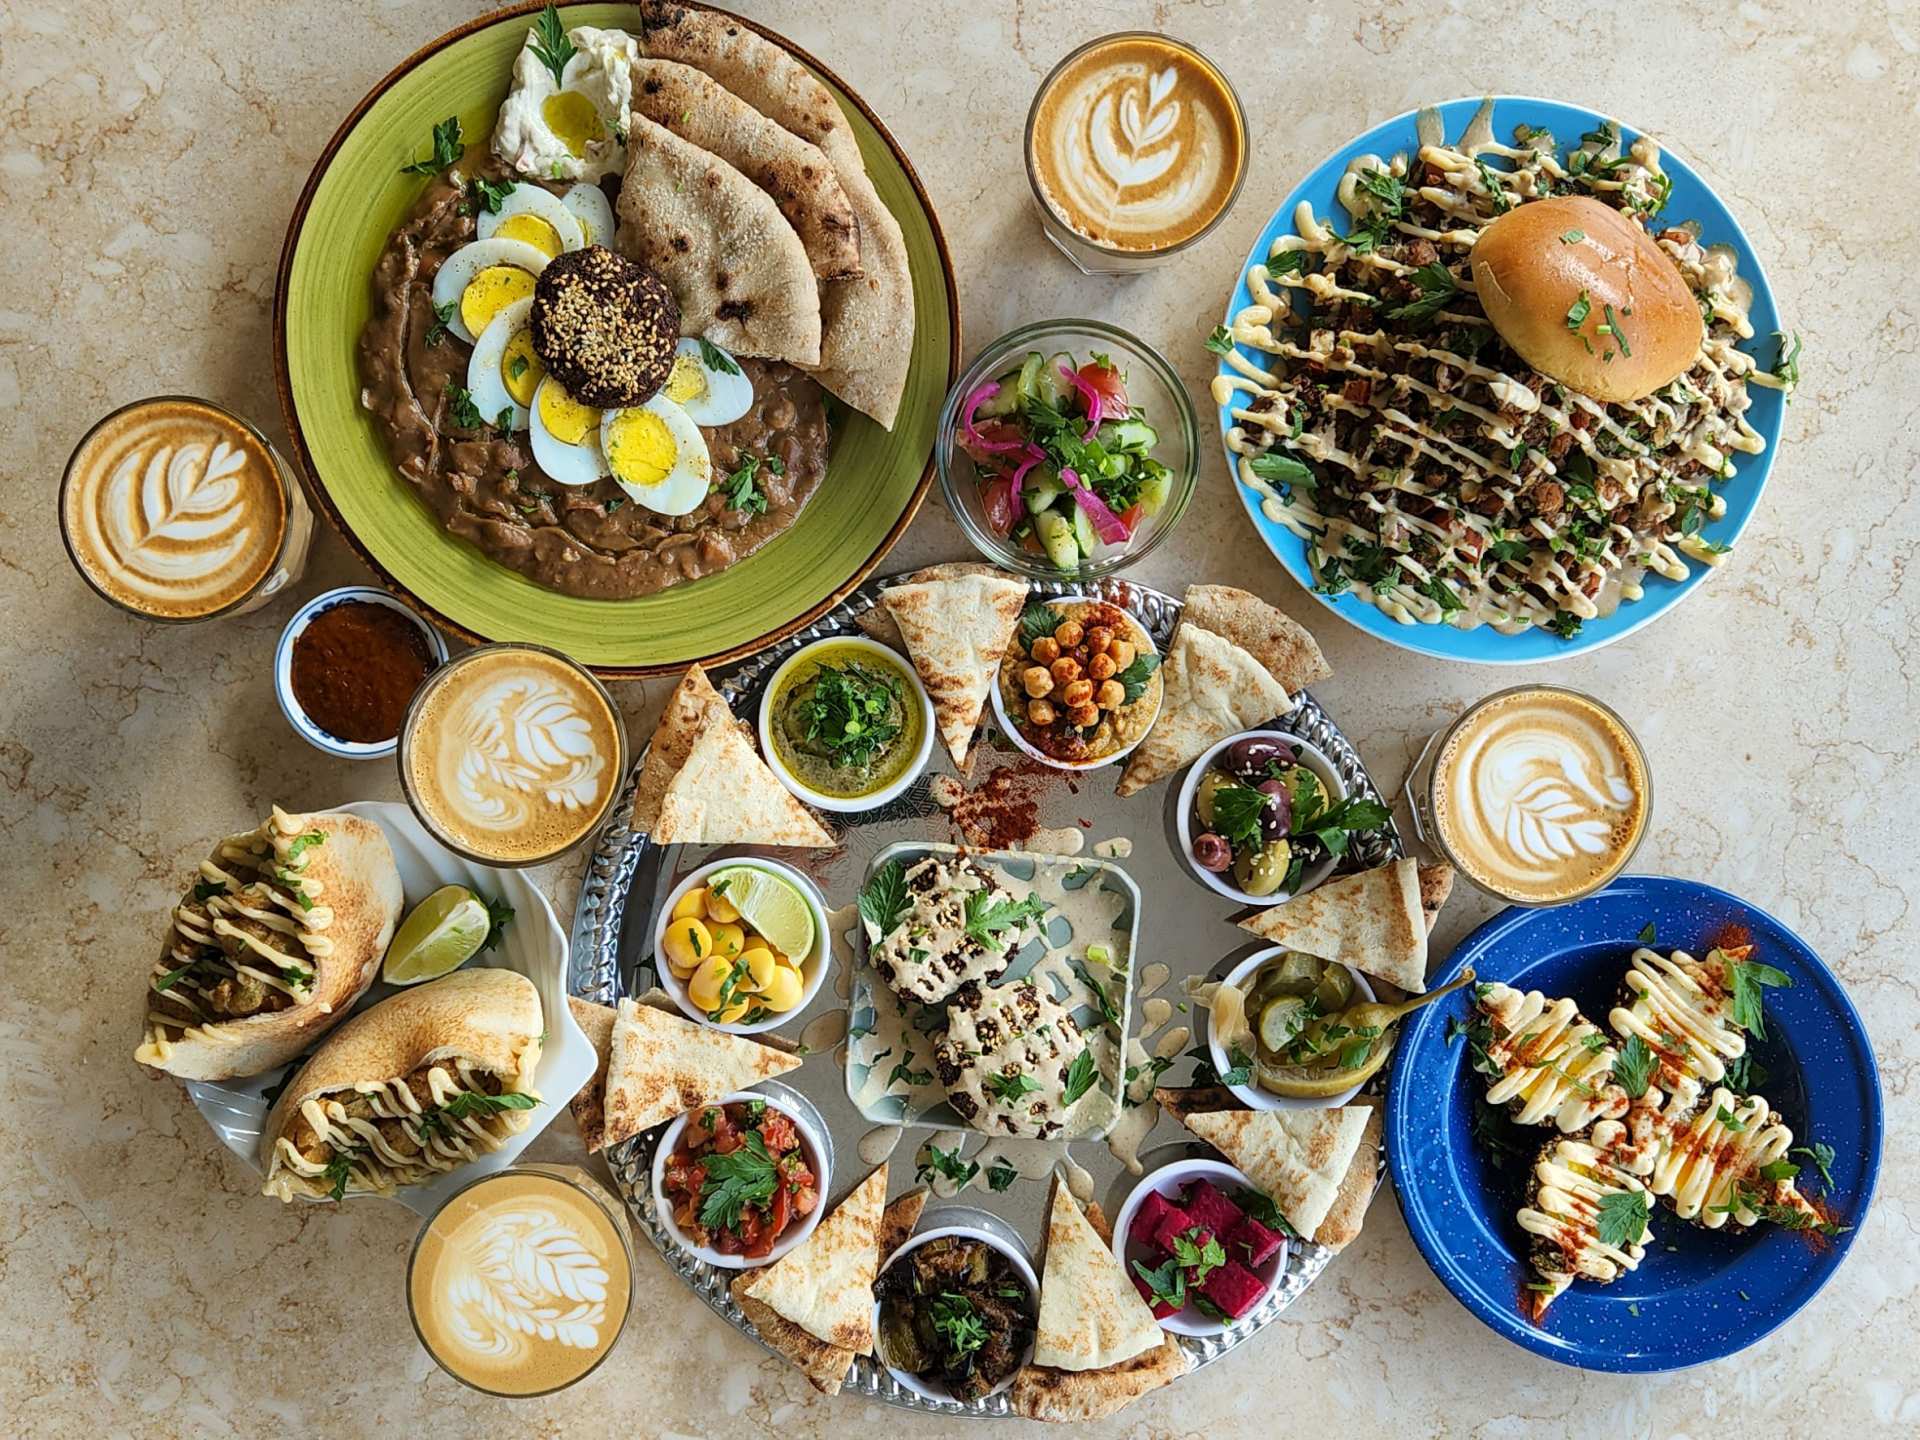 Best brunch in Toronto | A spread of dishes at Maha's Egyptian Brunch